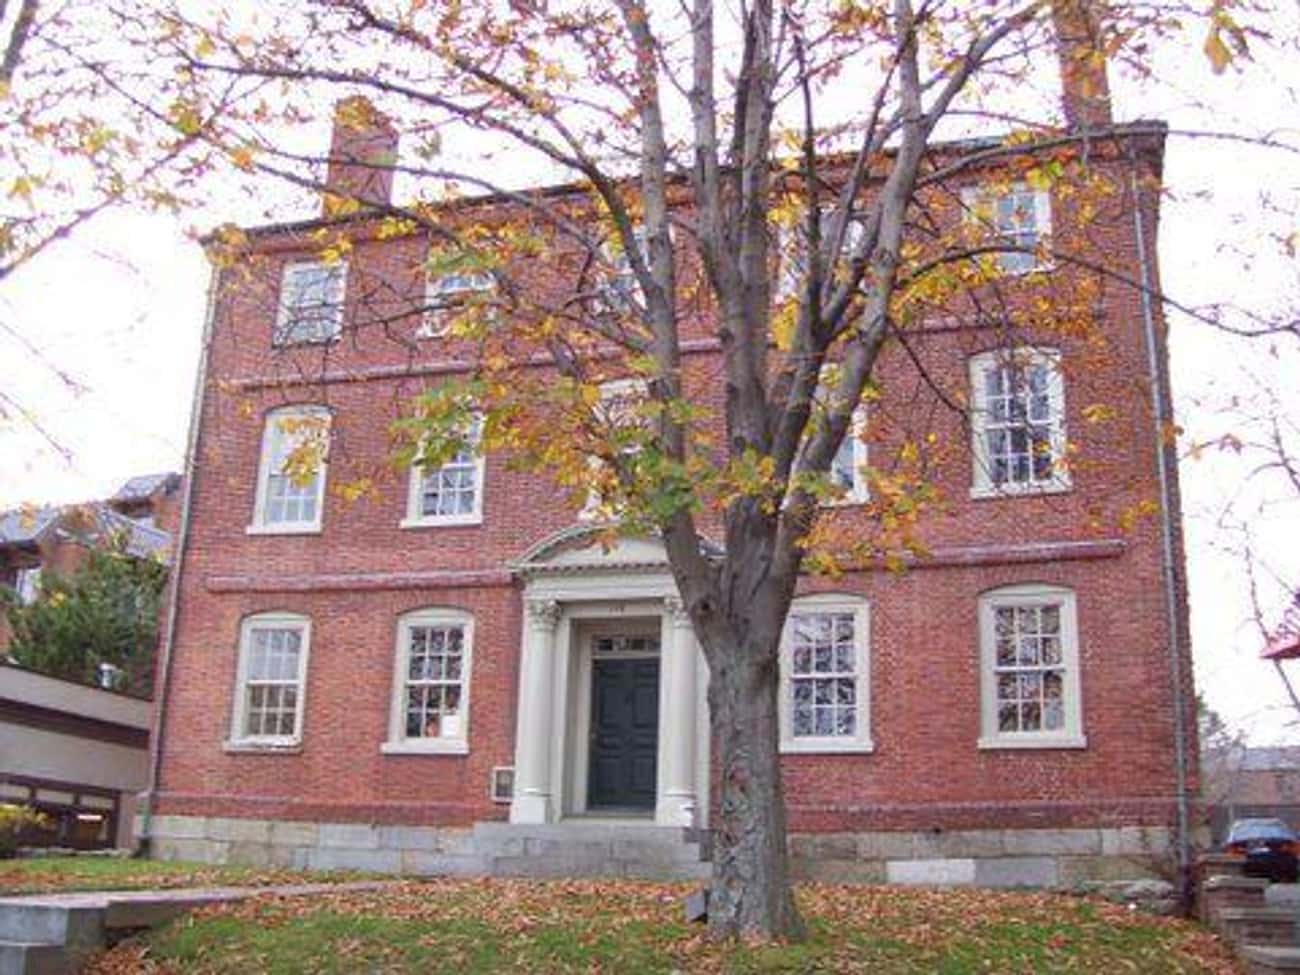 The Joshua Ward House Is Connected To The Salem Witch Trials